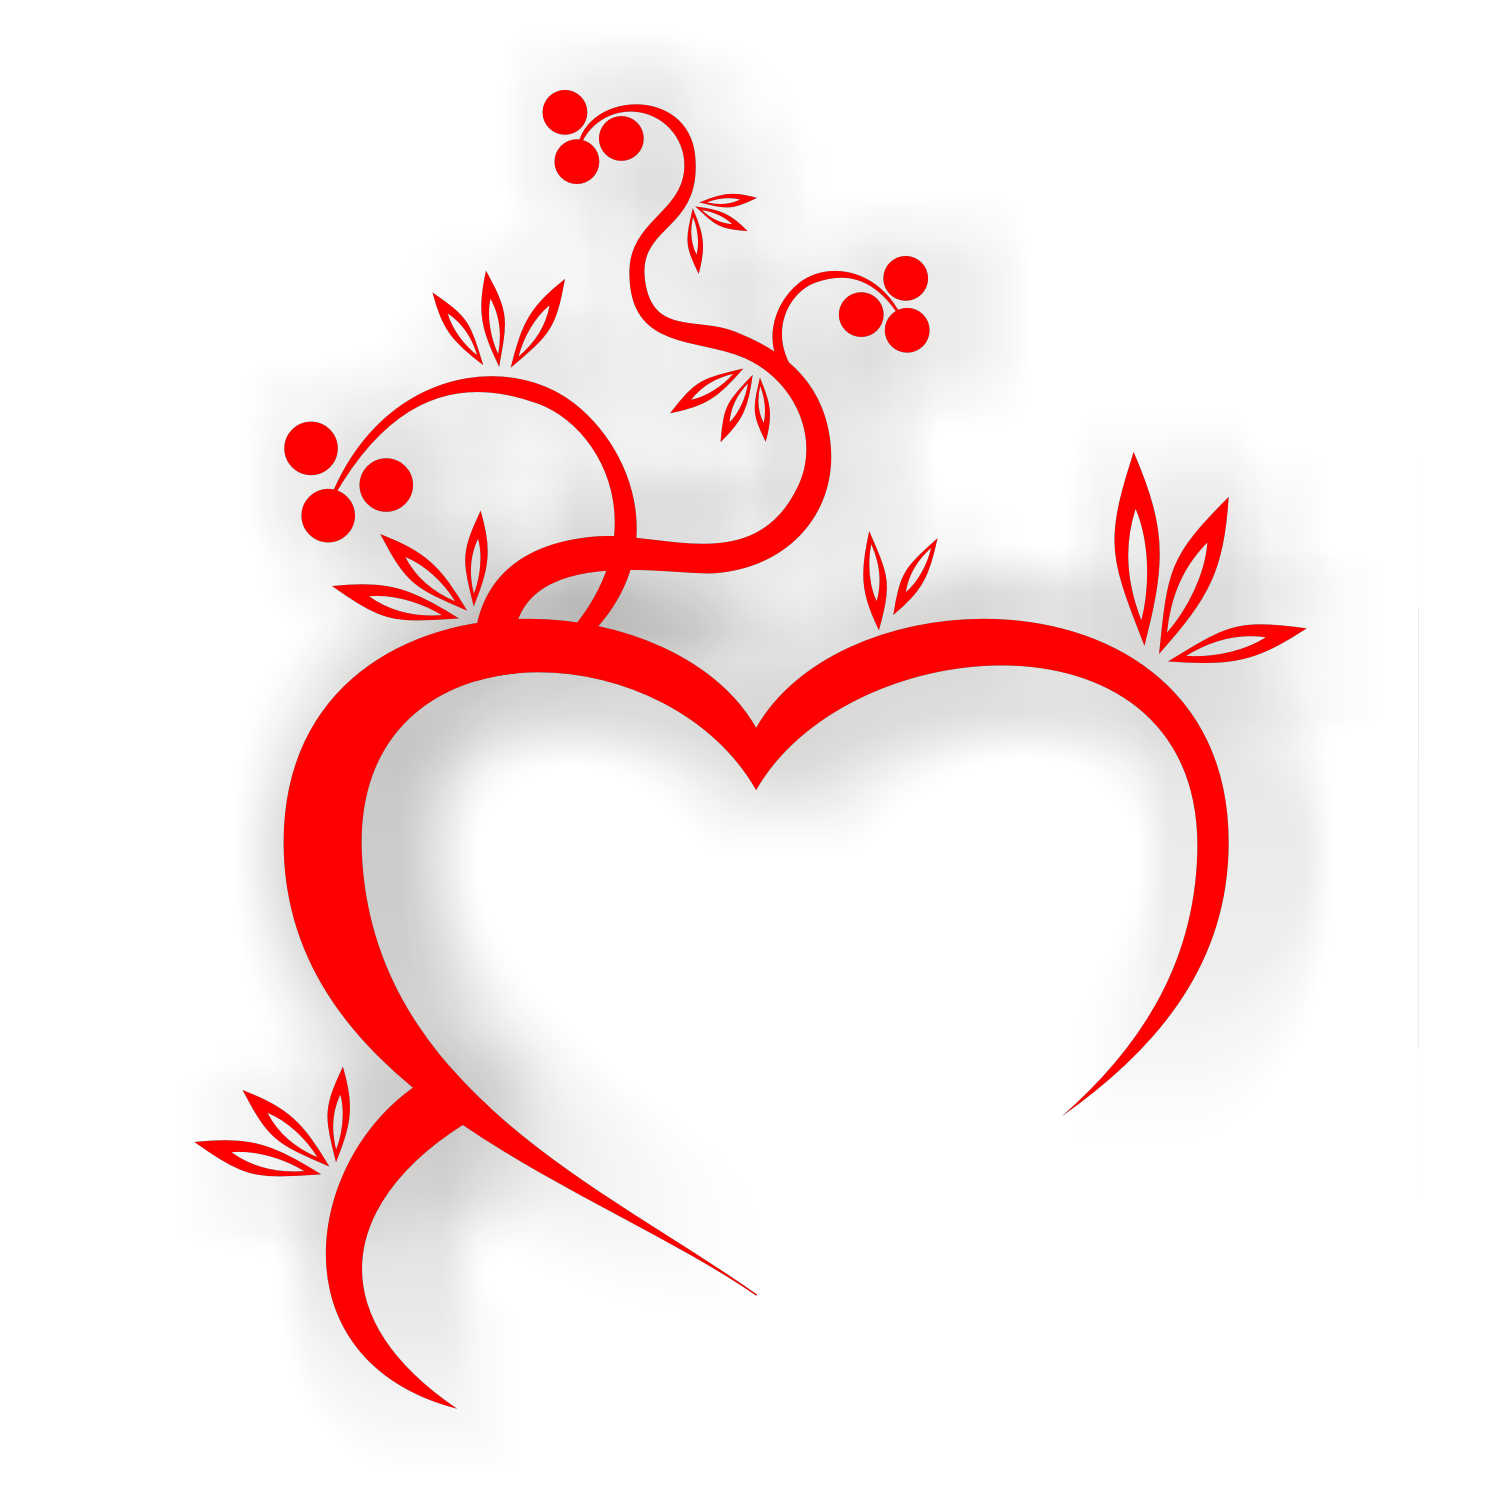 Download Vector for free use: Heart vector